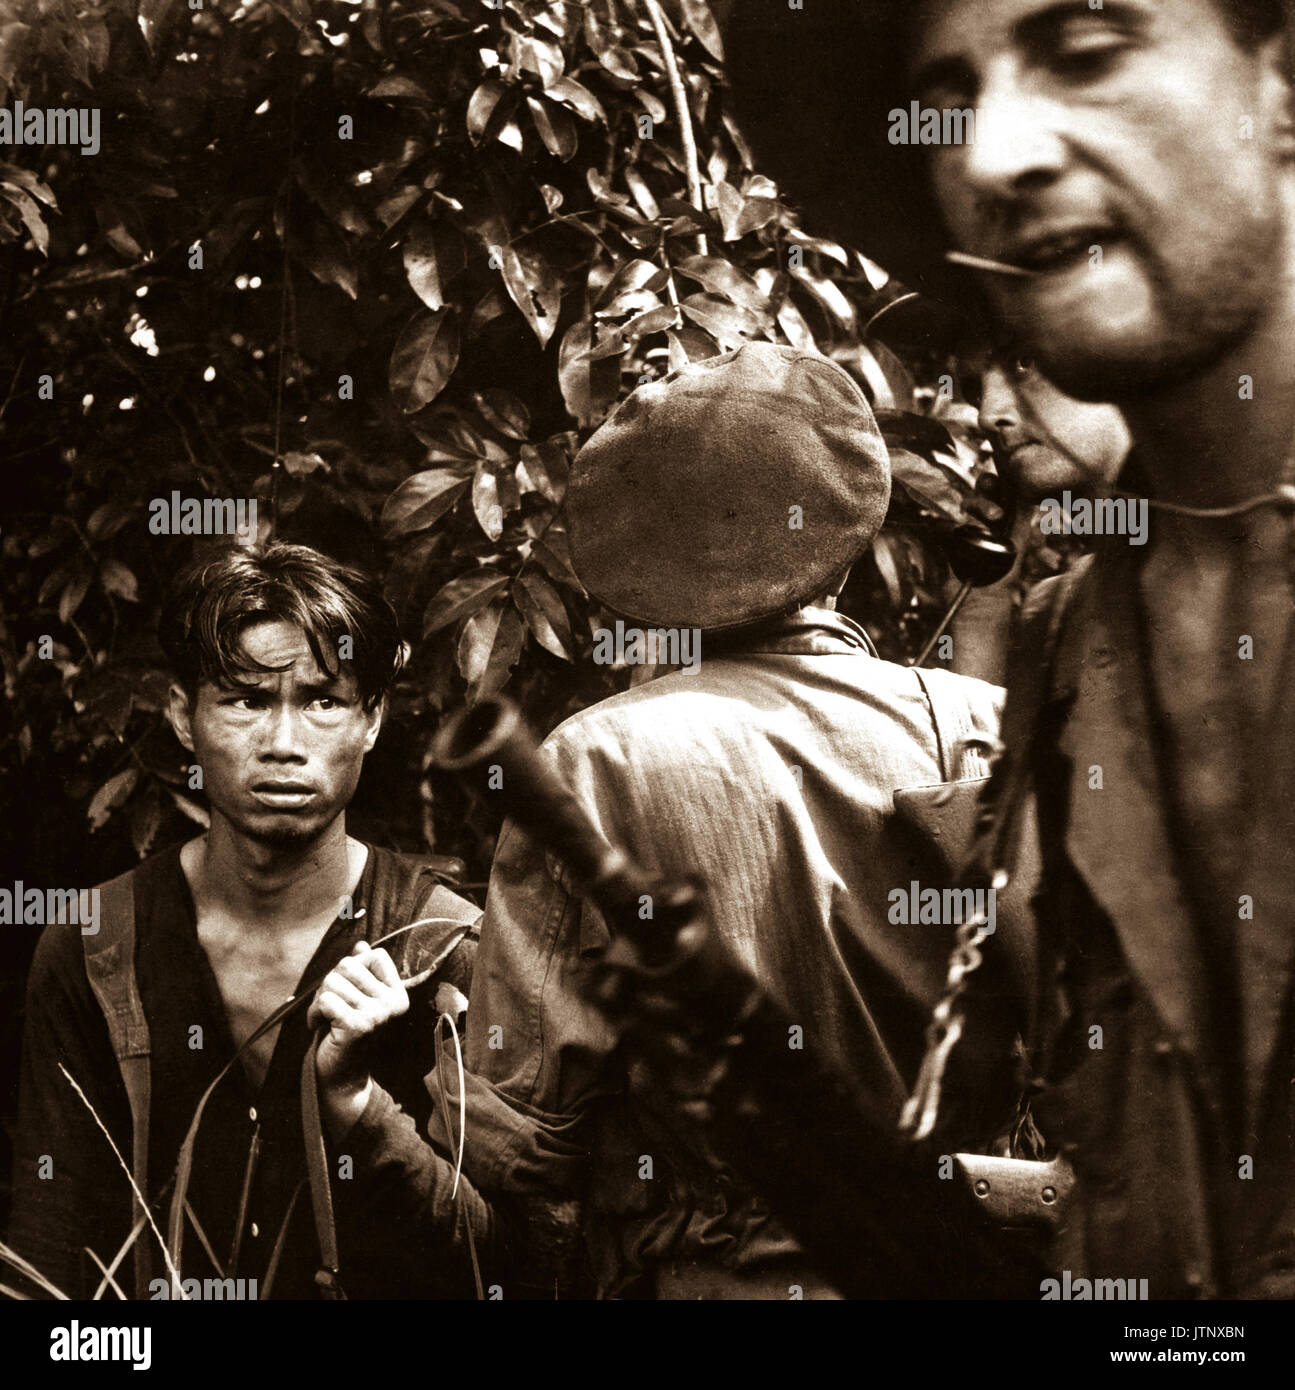 The French Foreign Legion is playing the major combat role in the war against the Vietminh.  Here a red-suspect has been found hiding in the jungle and is now being questioned by the advance patrol, who caught him.  Ca.  1954.  Pix.  (USIA) EXACT DATE SHOT UNKNOWN NARA FILE #:  306-PS-55-10516 WAR & CONFLICT BOOK #:  383 Stock Photo